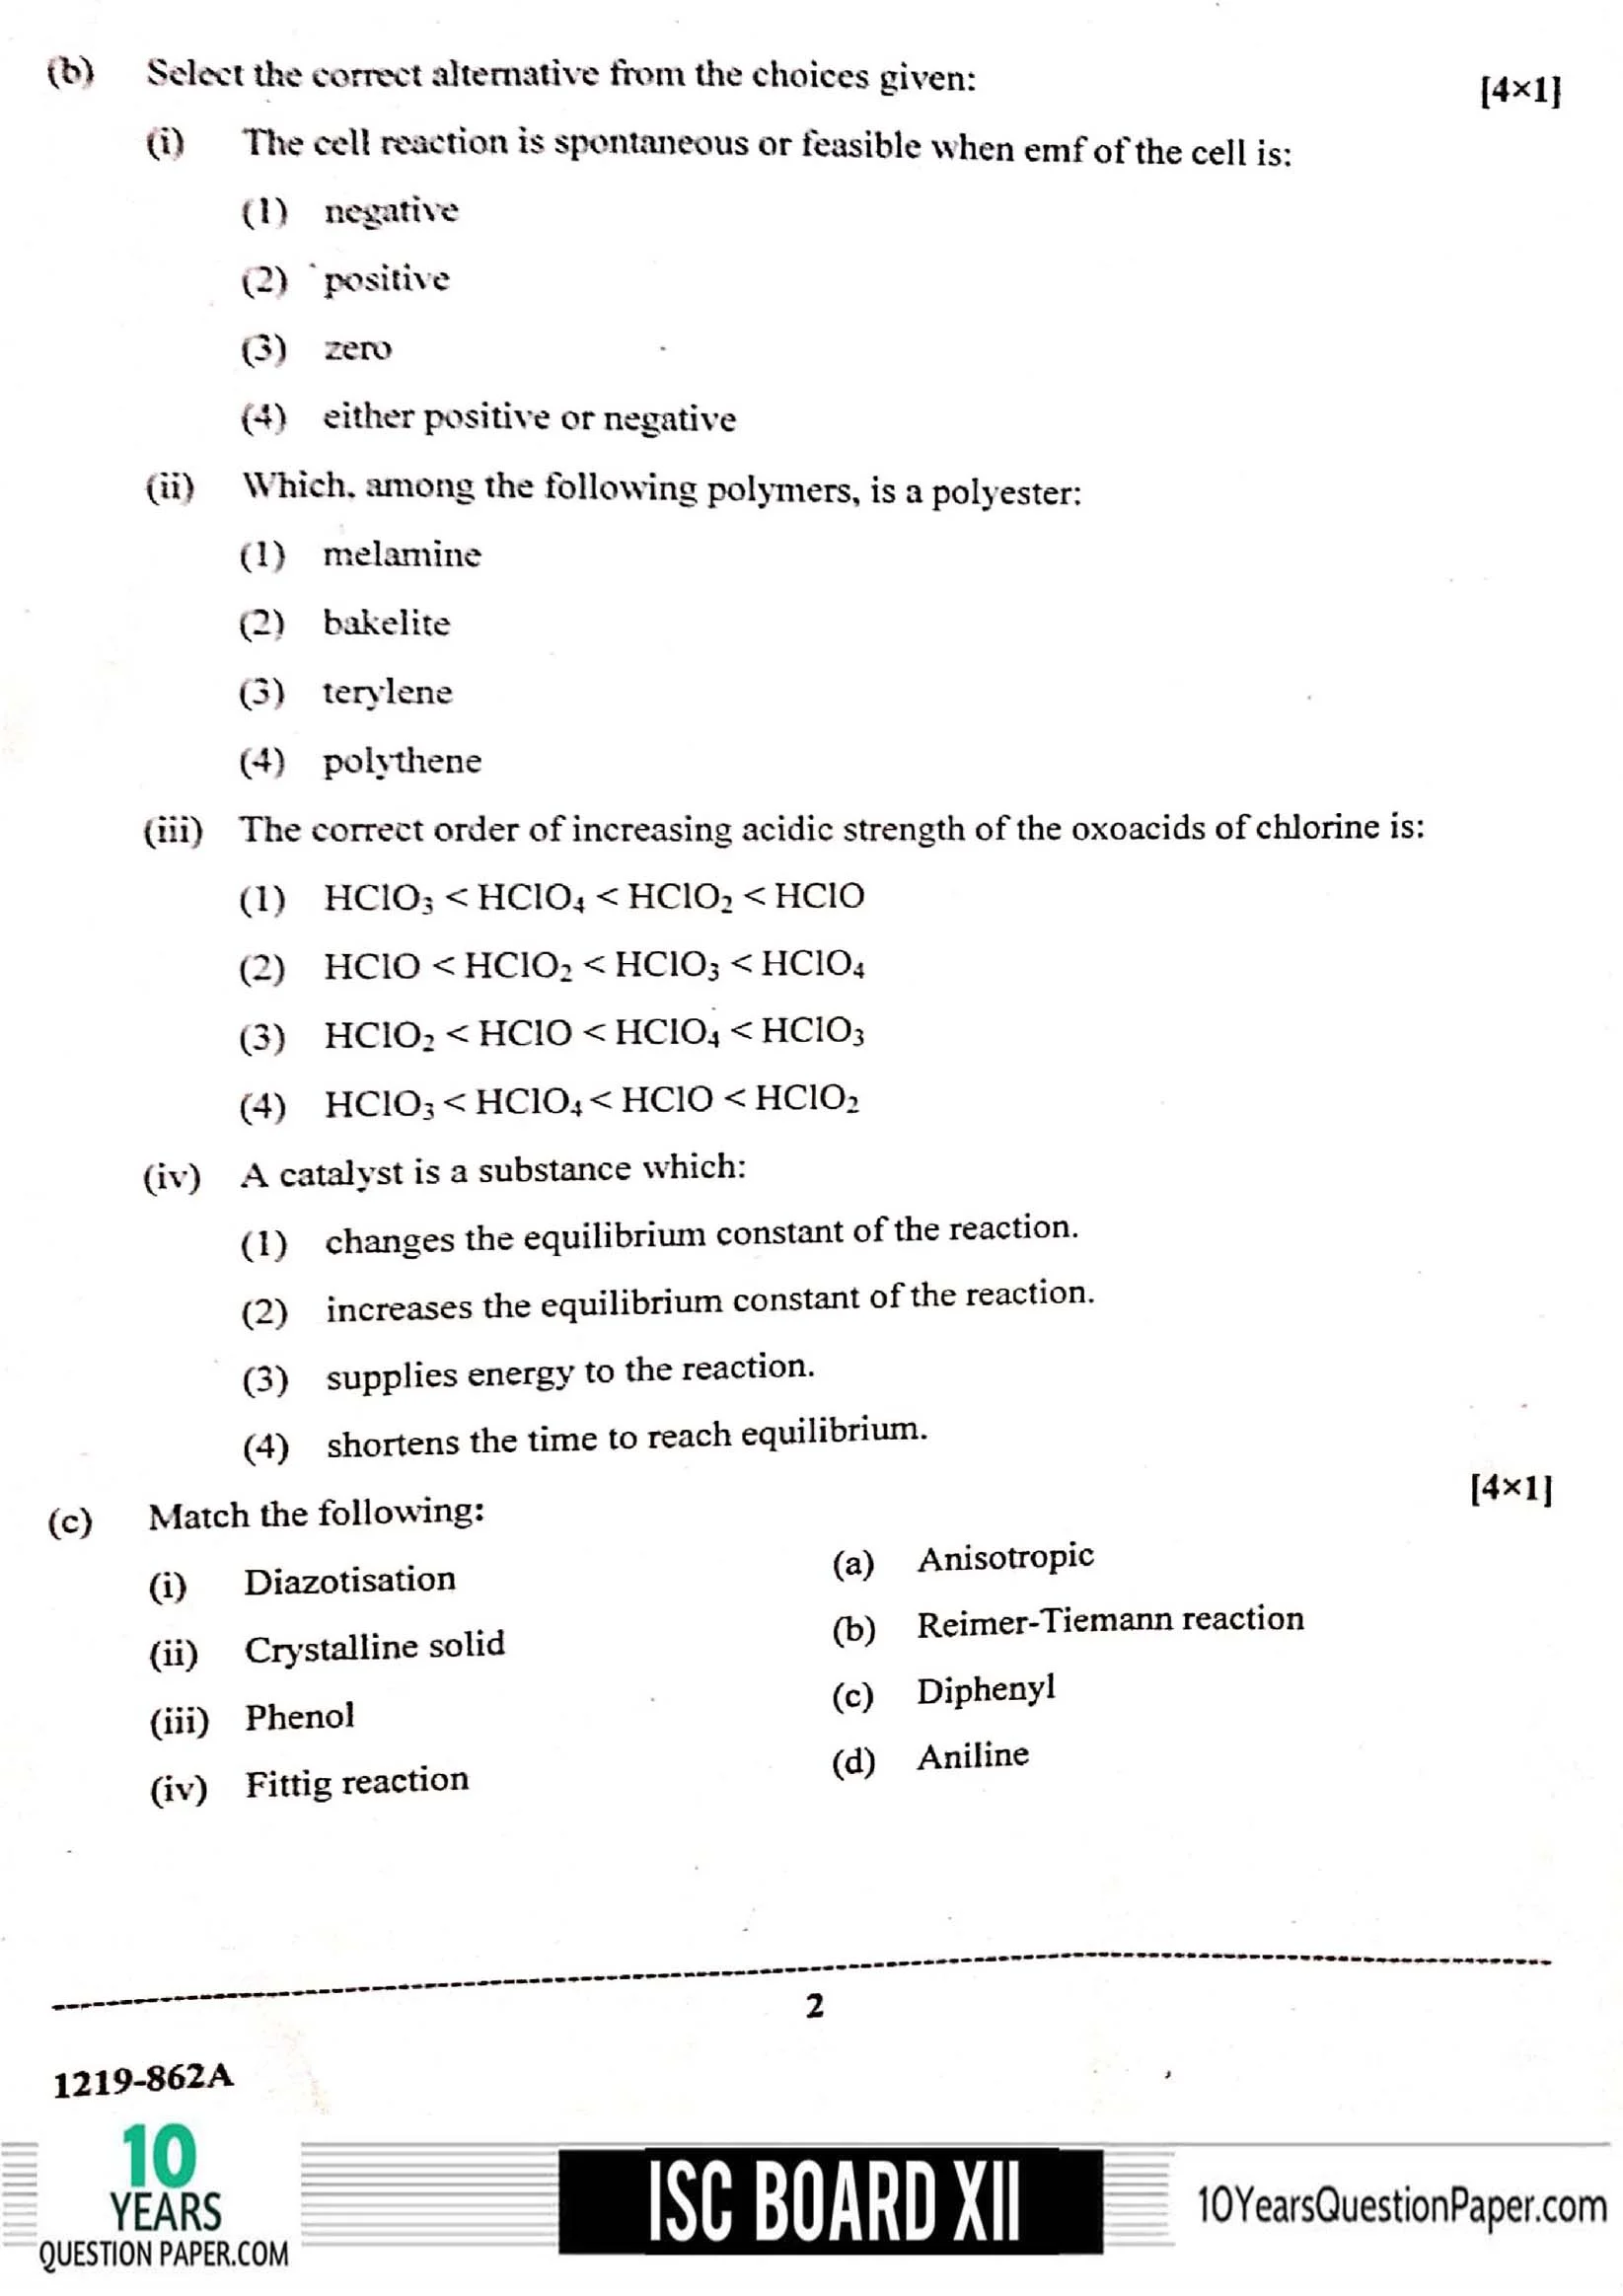 ISC Class 12 Chemistry 2019 Question Paper